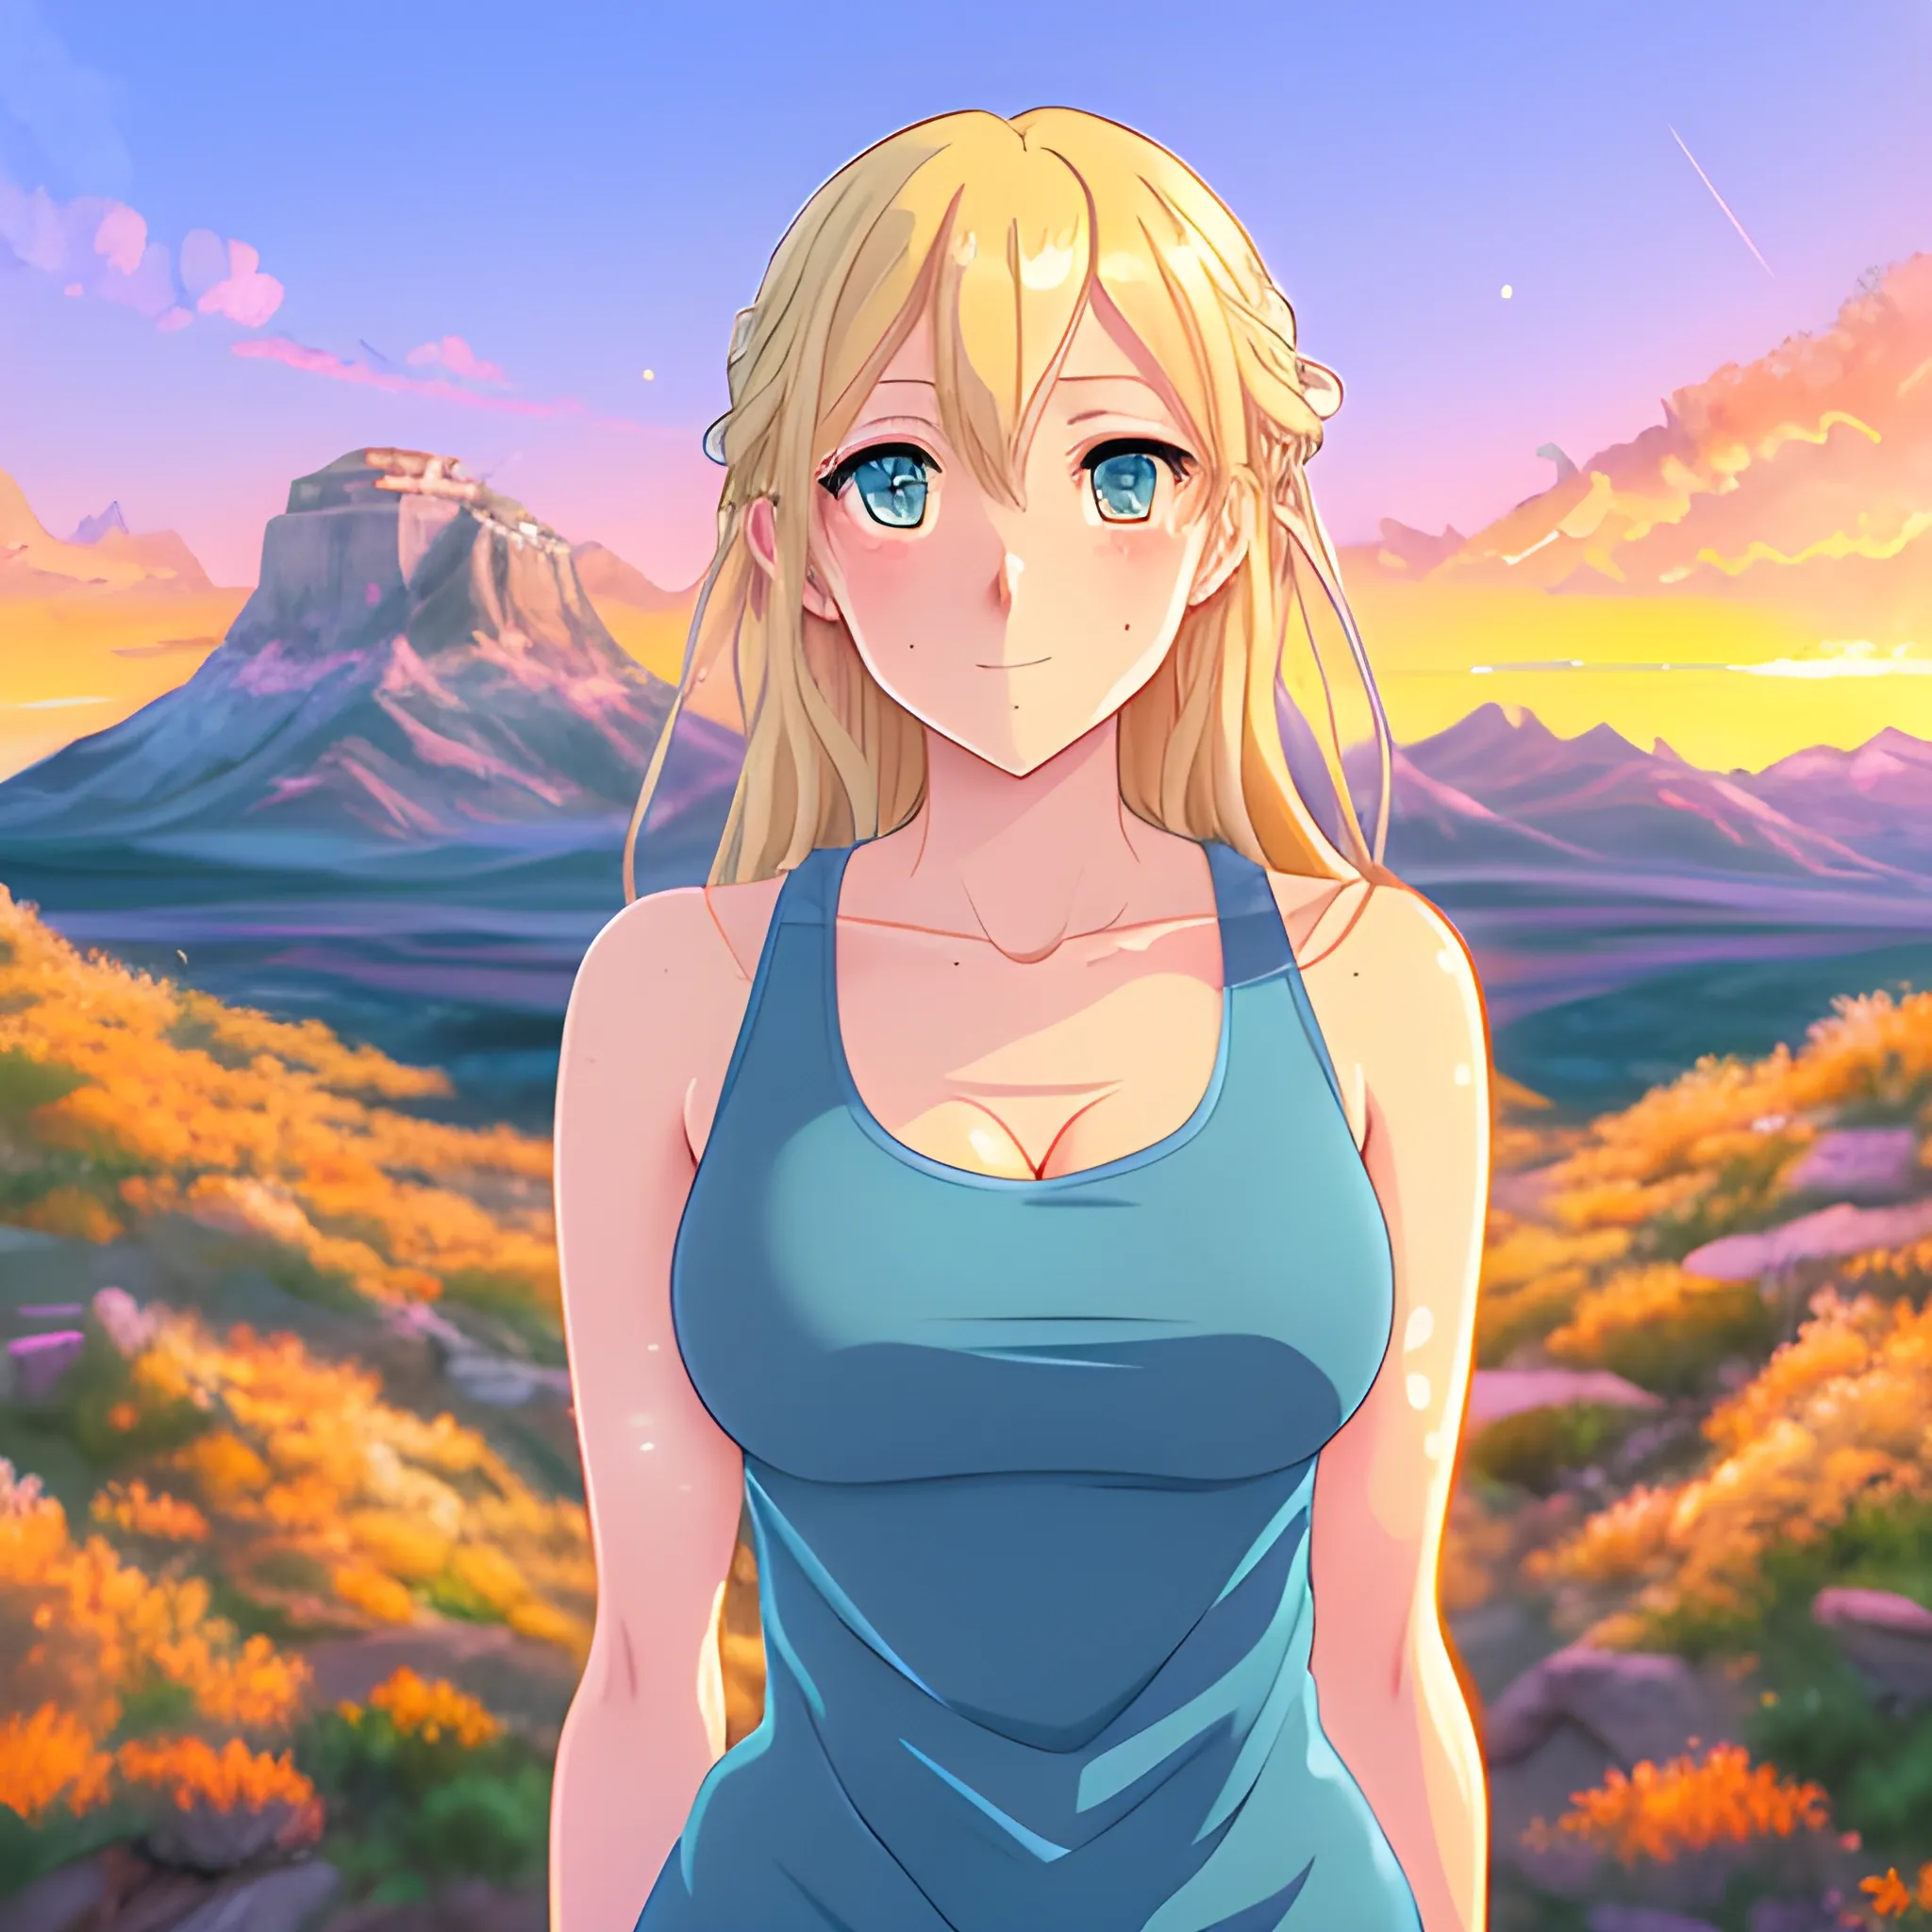 Anime art, cute young girl, thin and flat, semi-long blond hair in motion, rosy cheeks, tender face, big watery blue eyes, looks sad face, wearing a tank top not revealing, magical and luminous aura around herself, light cinematographic, volumetric light, highly detailed, magic fantasy orange sky in background with sunset, stars and big rocky mountains in beginning of dusk, digital painting, 

size: 3048x3048